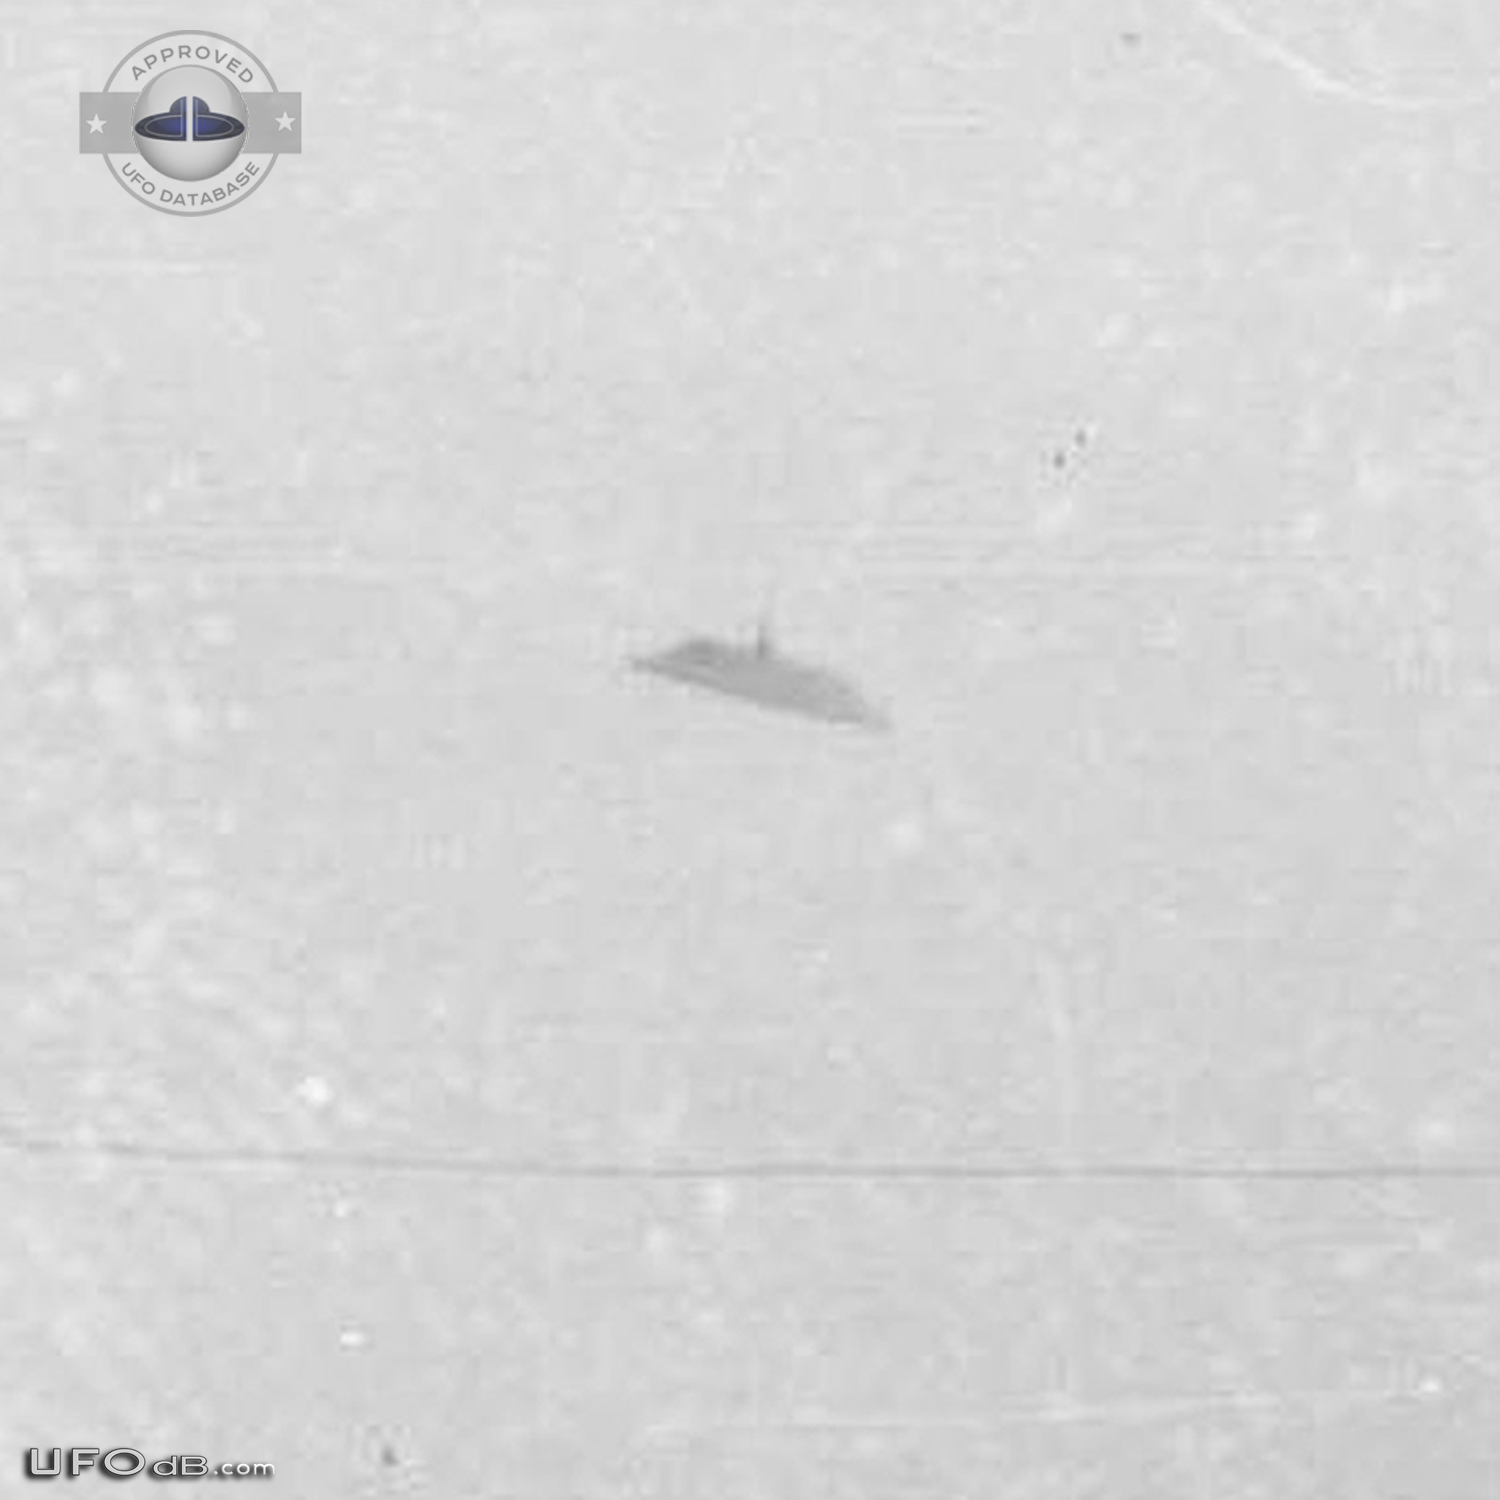 One of the Best UFO picture of all time - 1950 McMinnville, Oregon UFO Picture #423-8